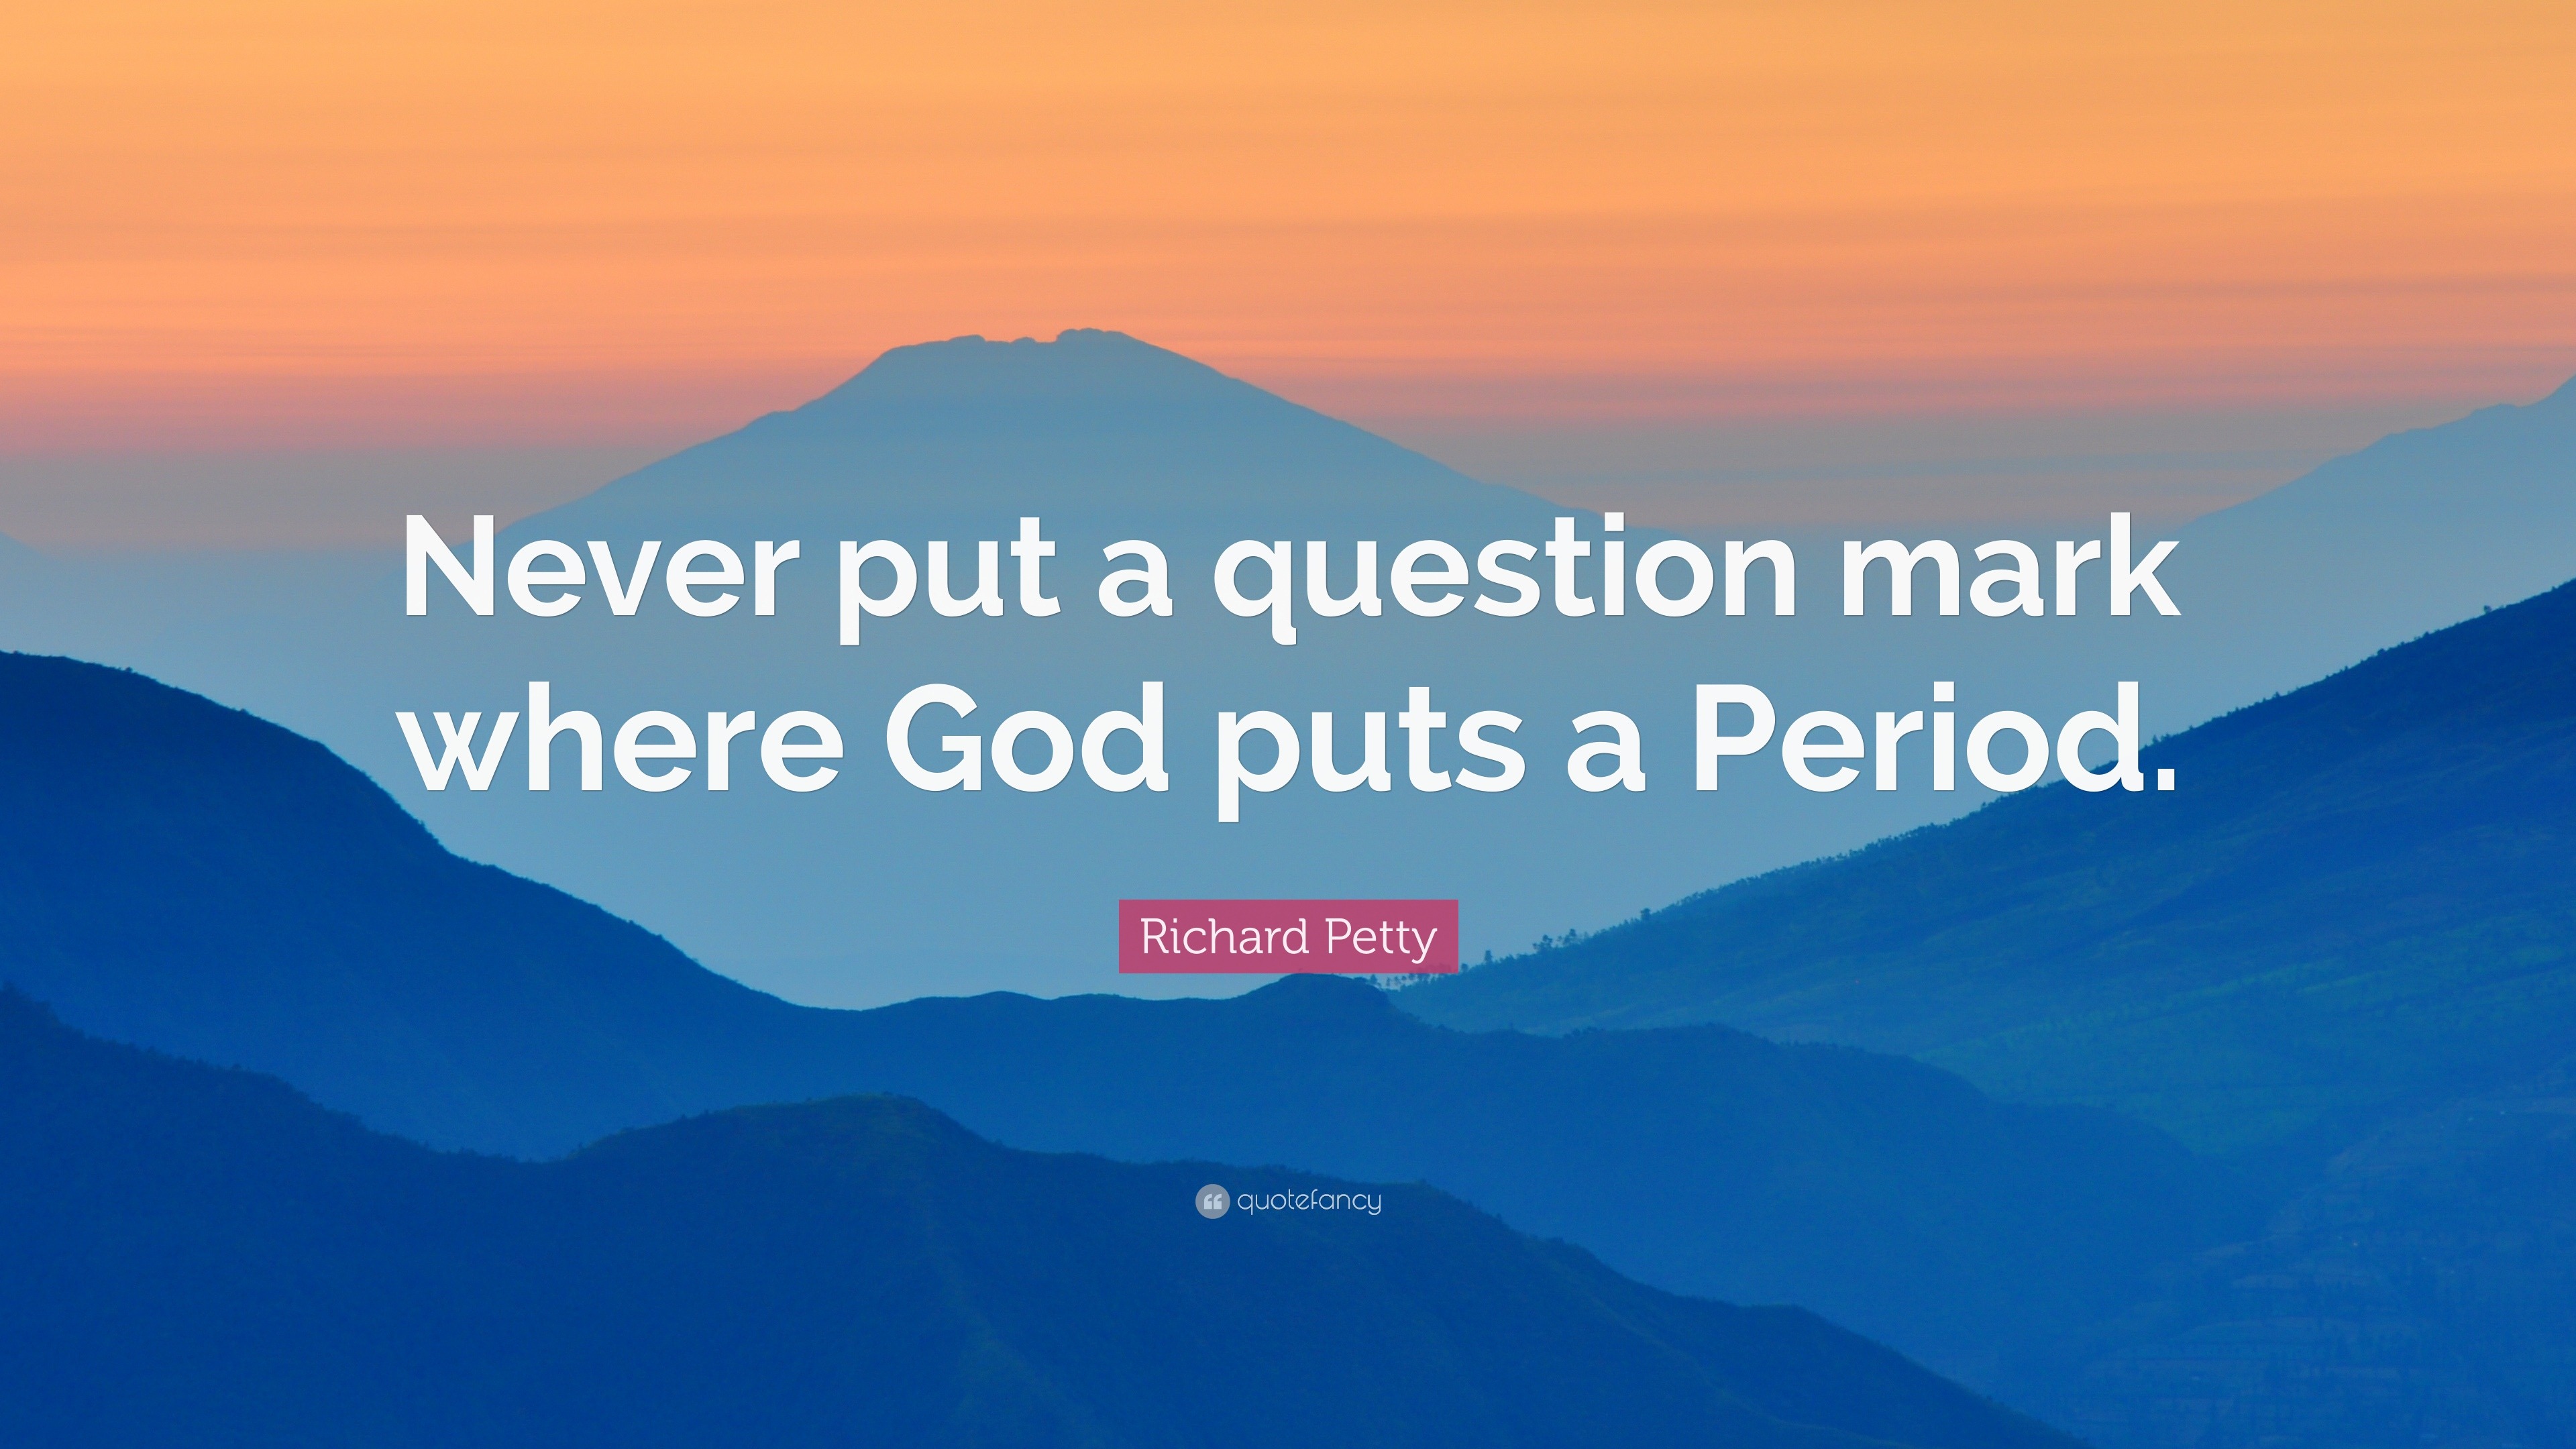 Richard Petty Quote: “Never put a question mark where God puts a Period